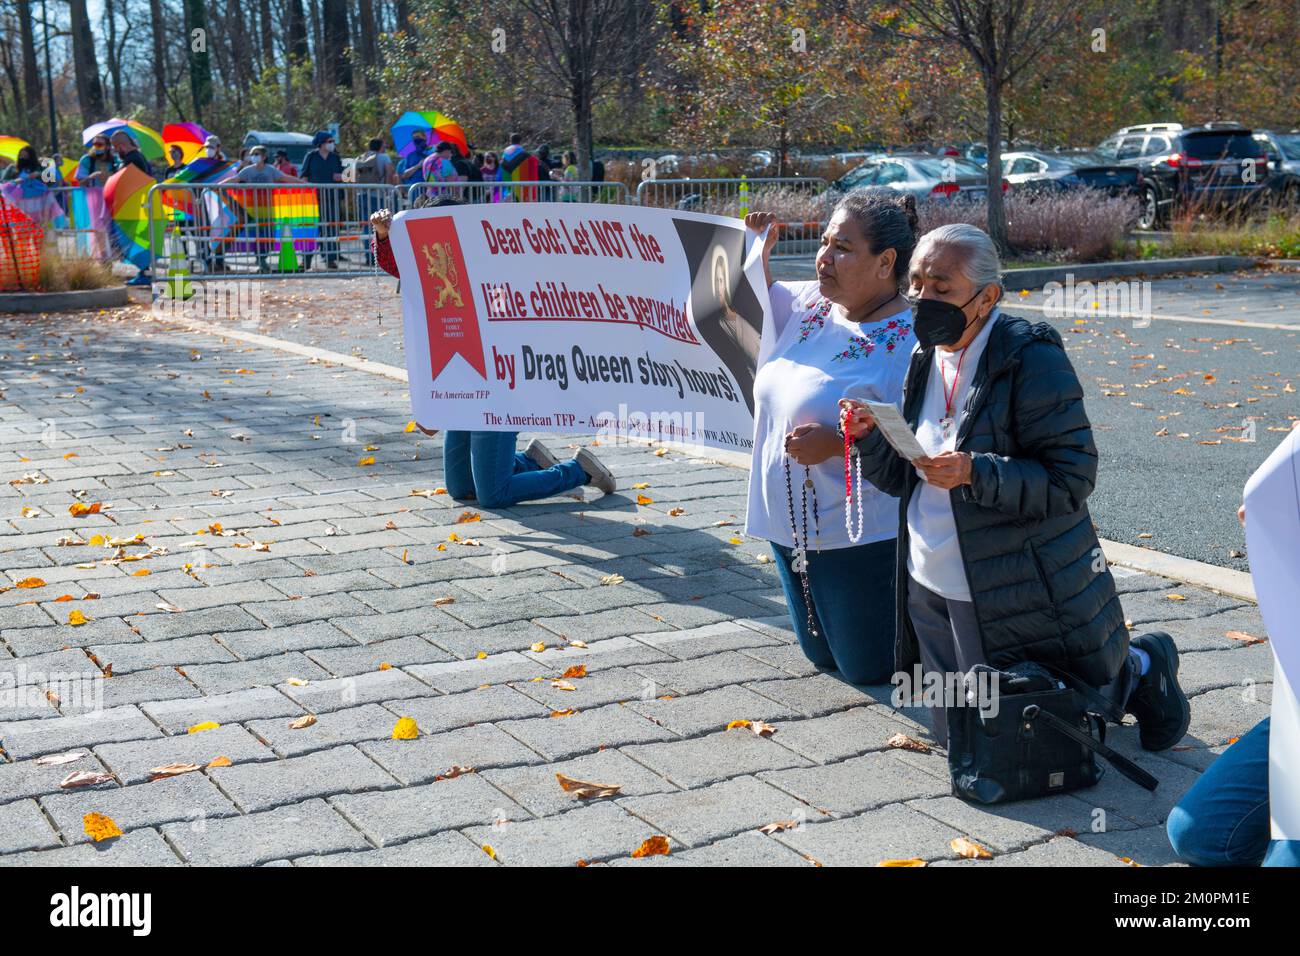 Religious Christian protesters object to a Drag Queen Story Hour in Wheaton Maryland November 2022 Stock Photo